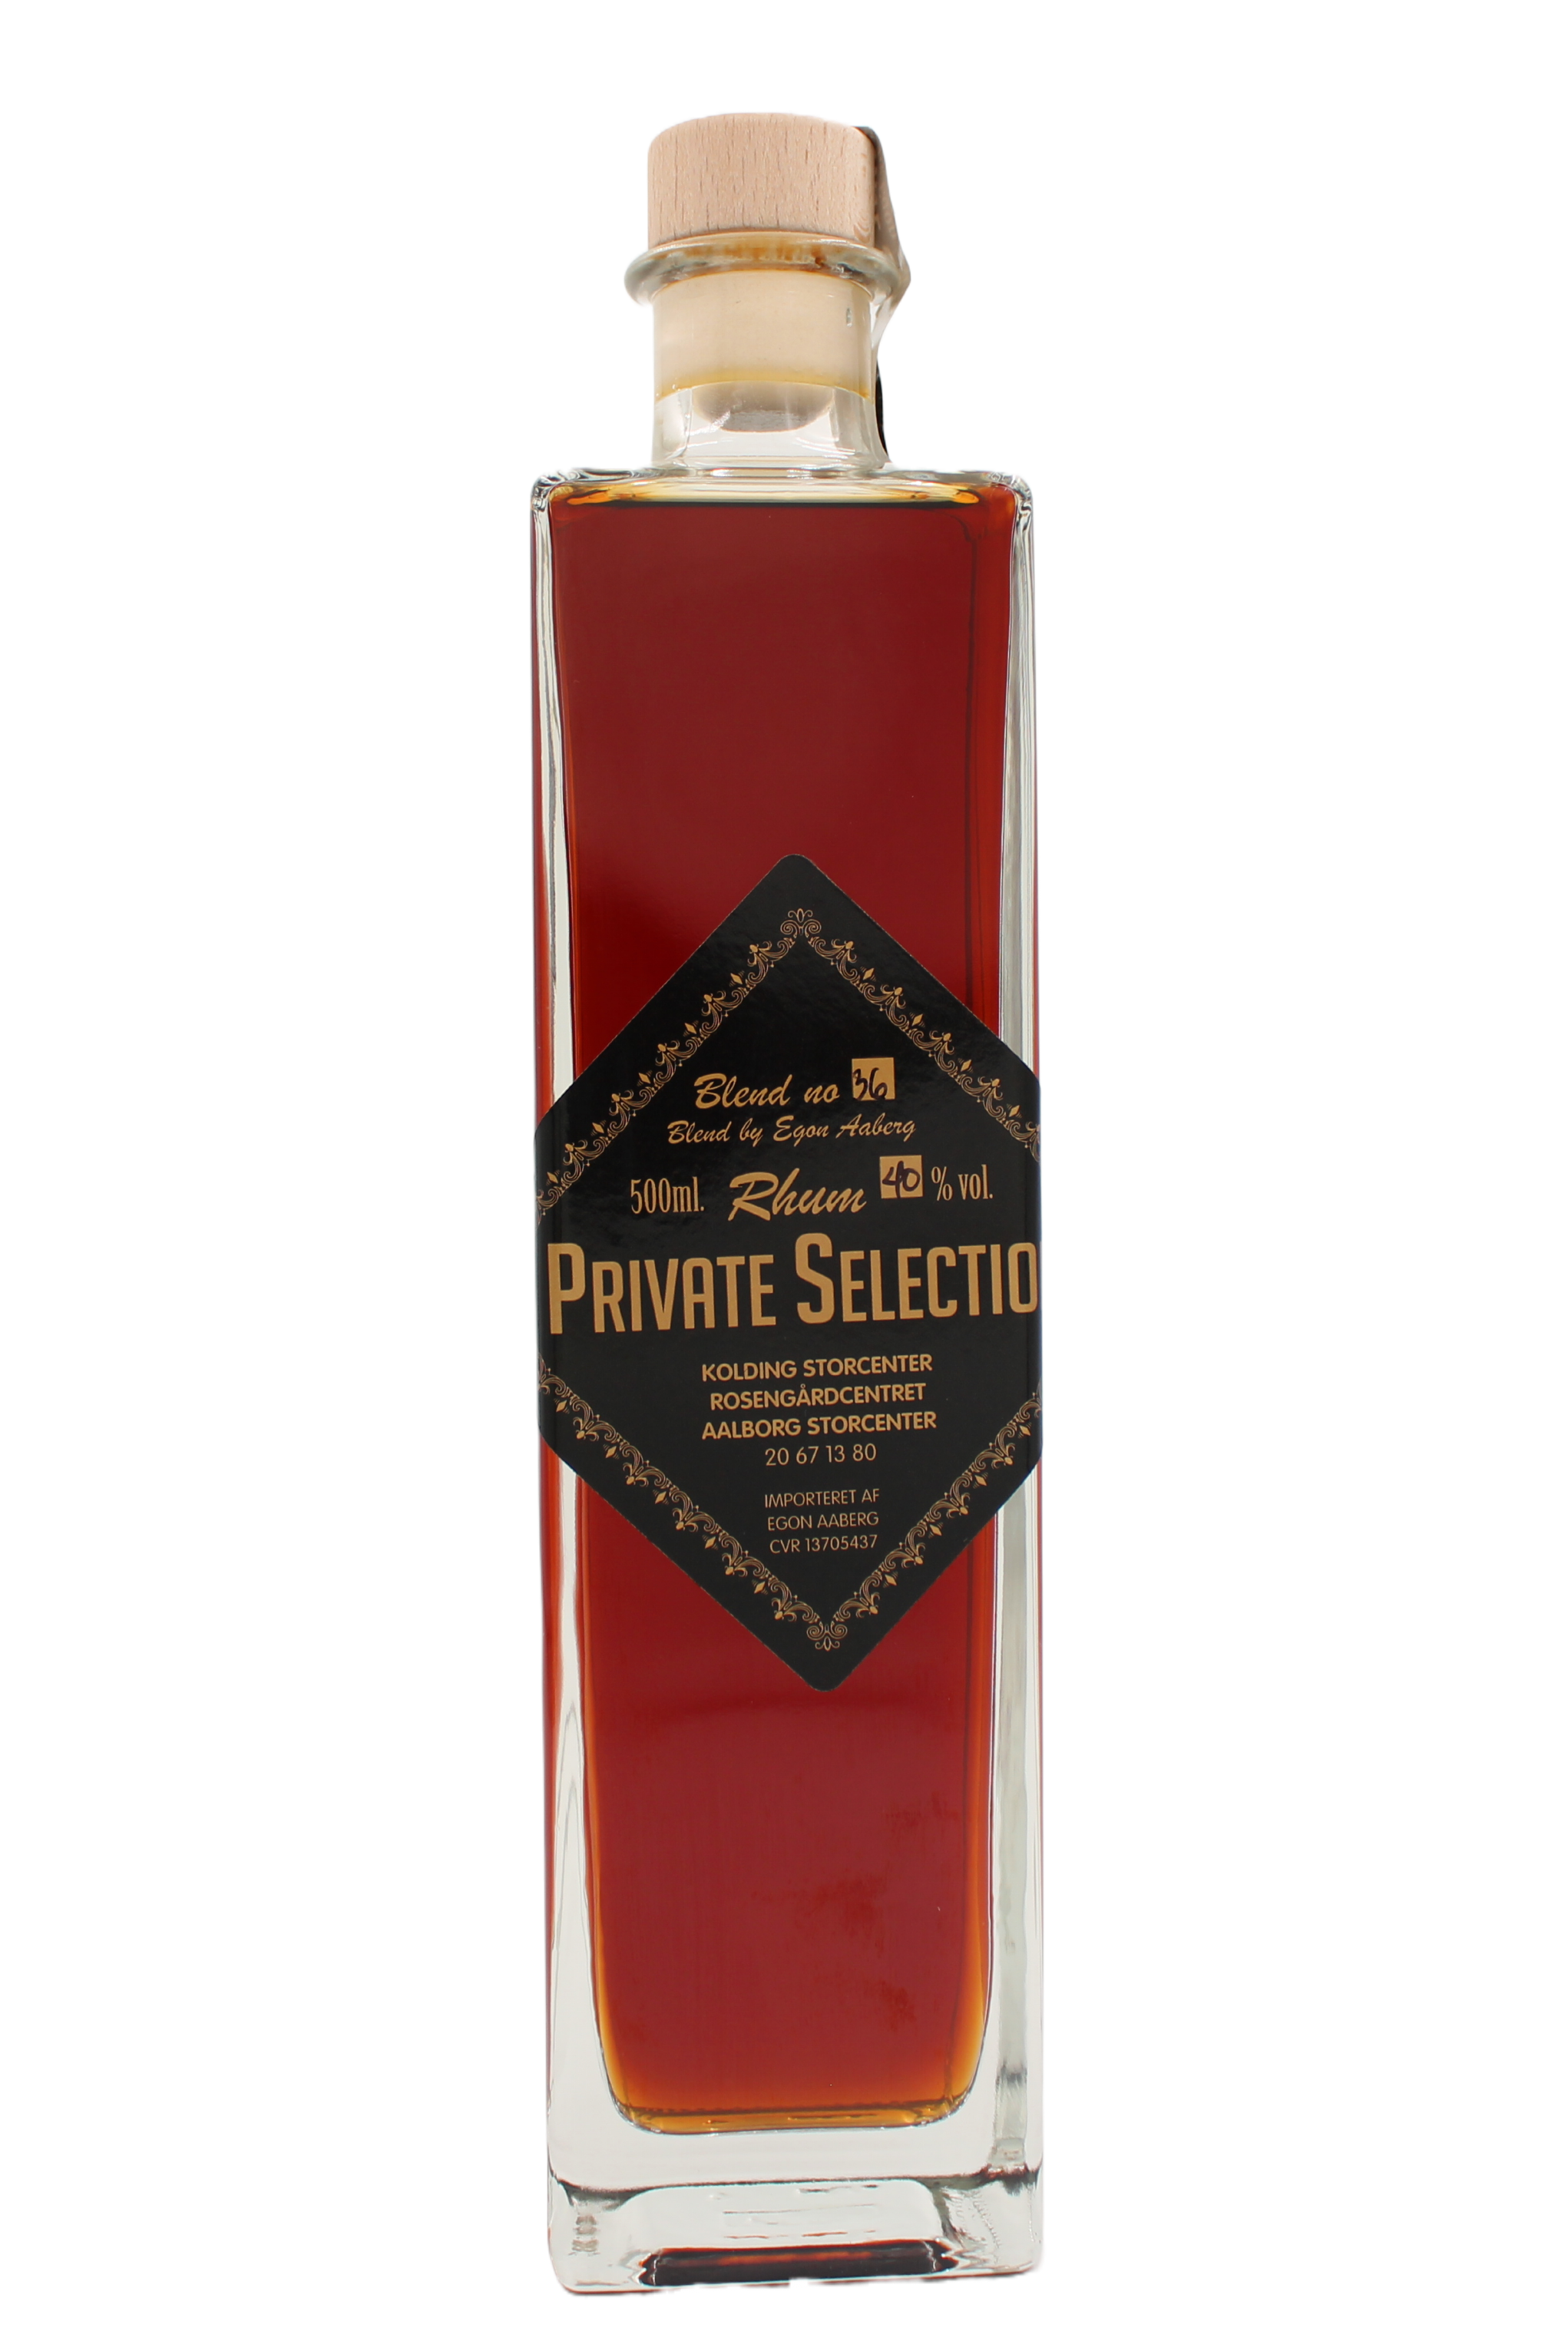 Private Selection - Blend no.